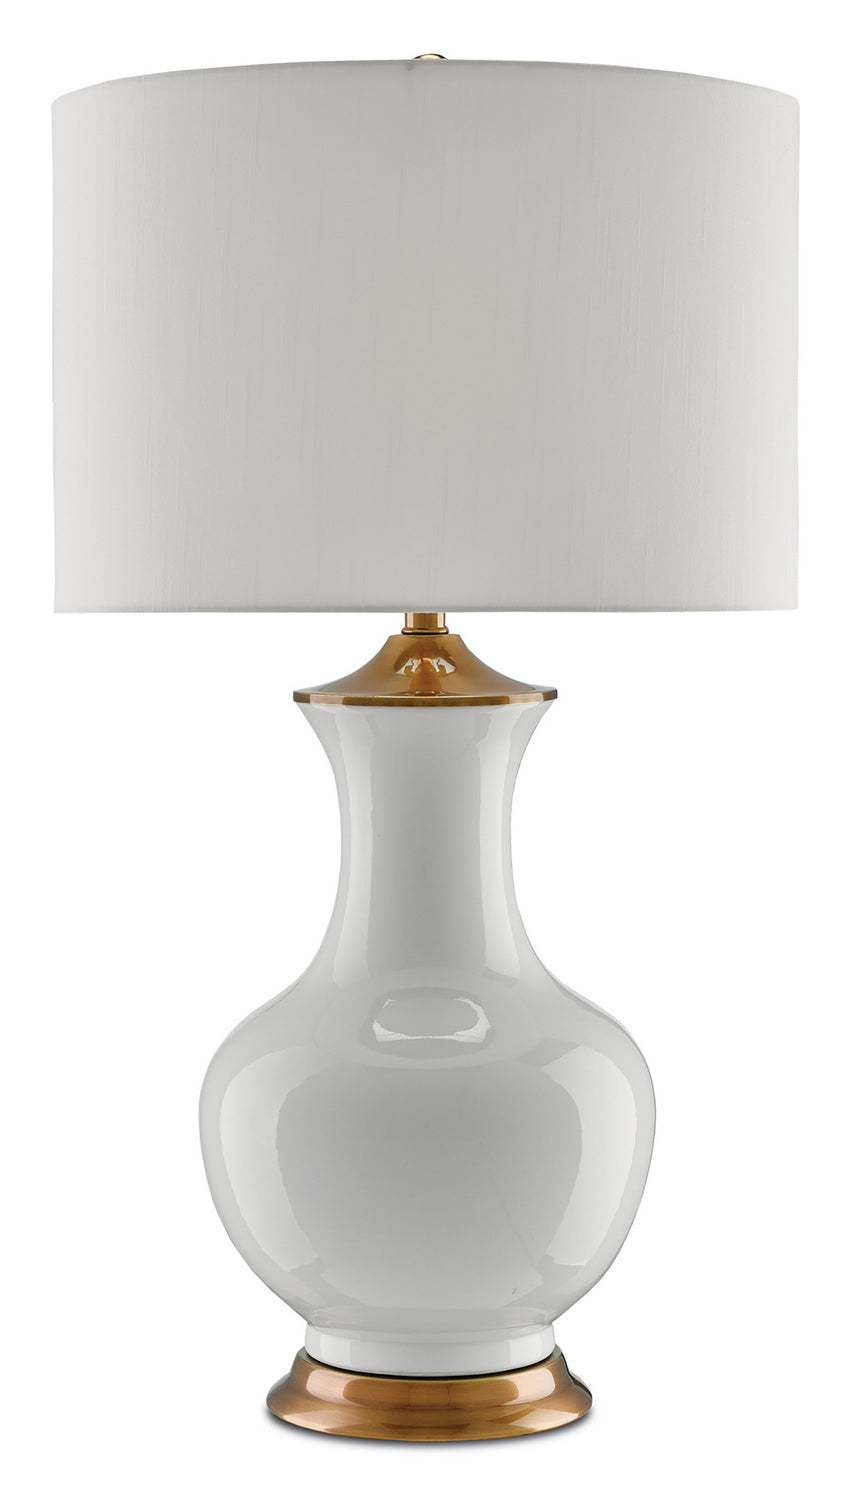 One Light Table Lamp from the Lilou collection in White/Antique Brass finish